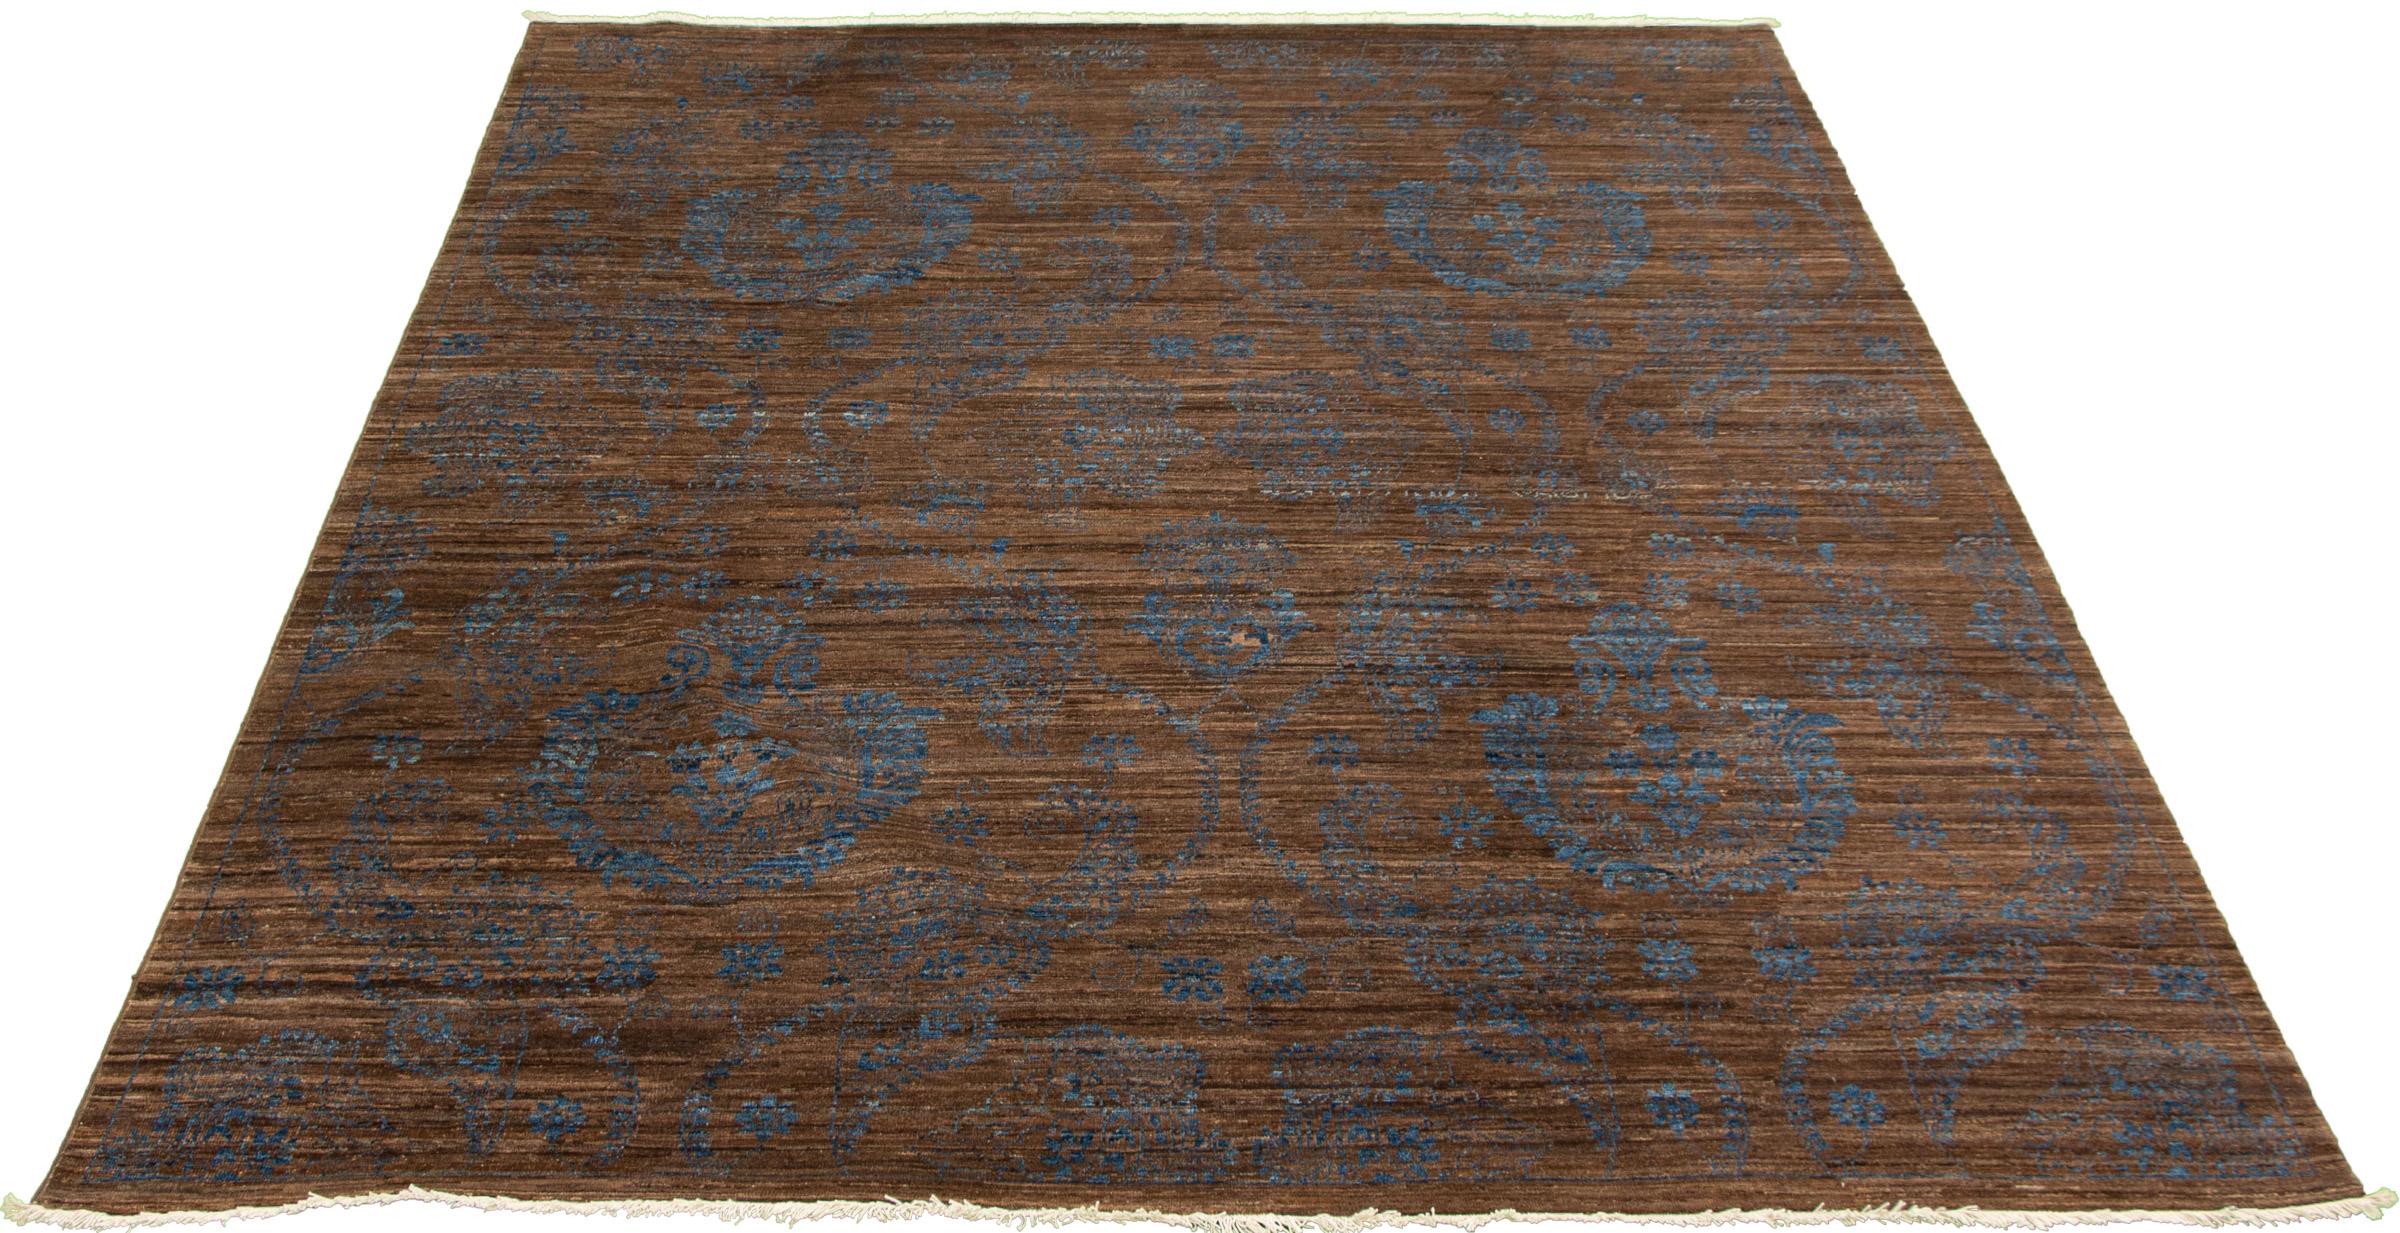 Vegetable Dyed Modern Wool Blue and Brown Persian Rug, 8’ x 10’ For Sale